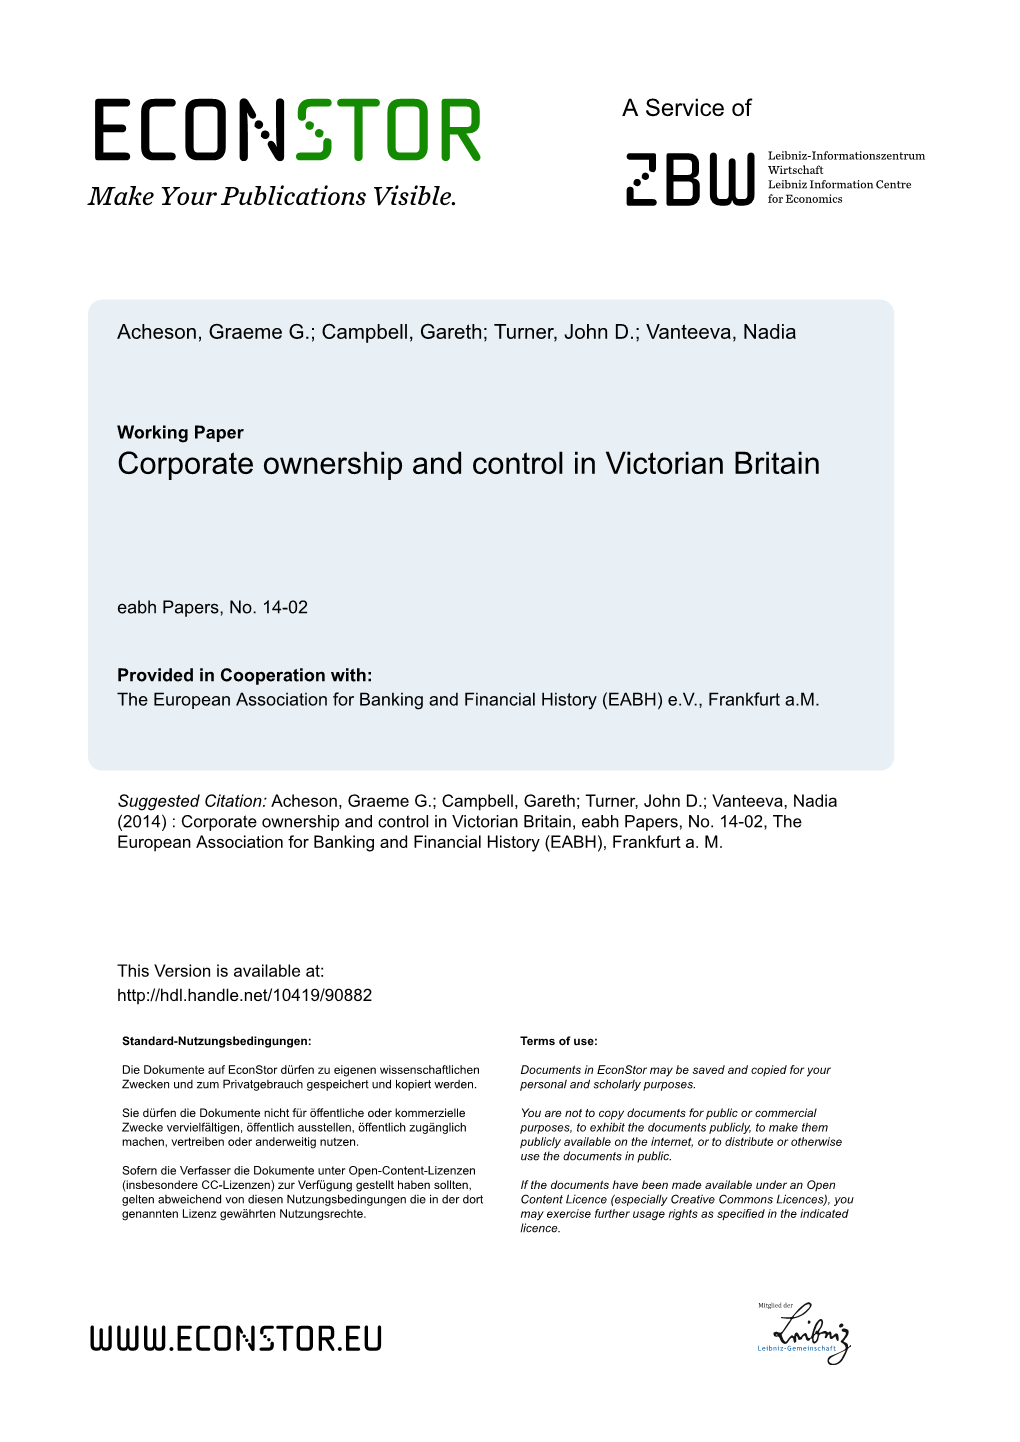 Corporate Ownership and Control in Victorian Britain